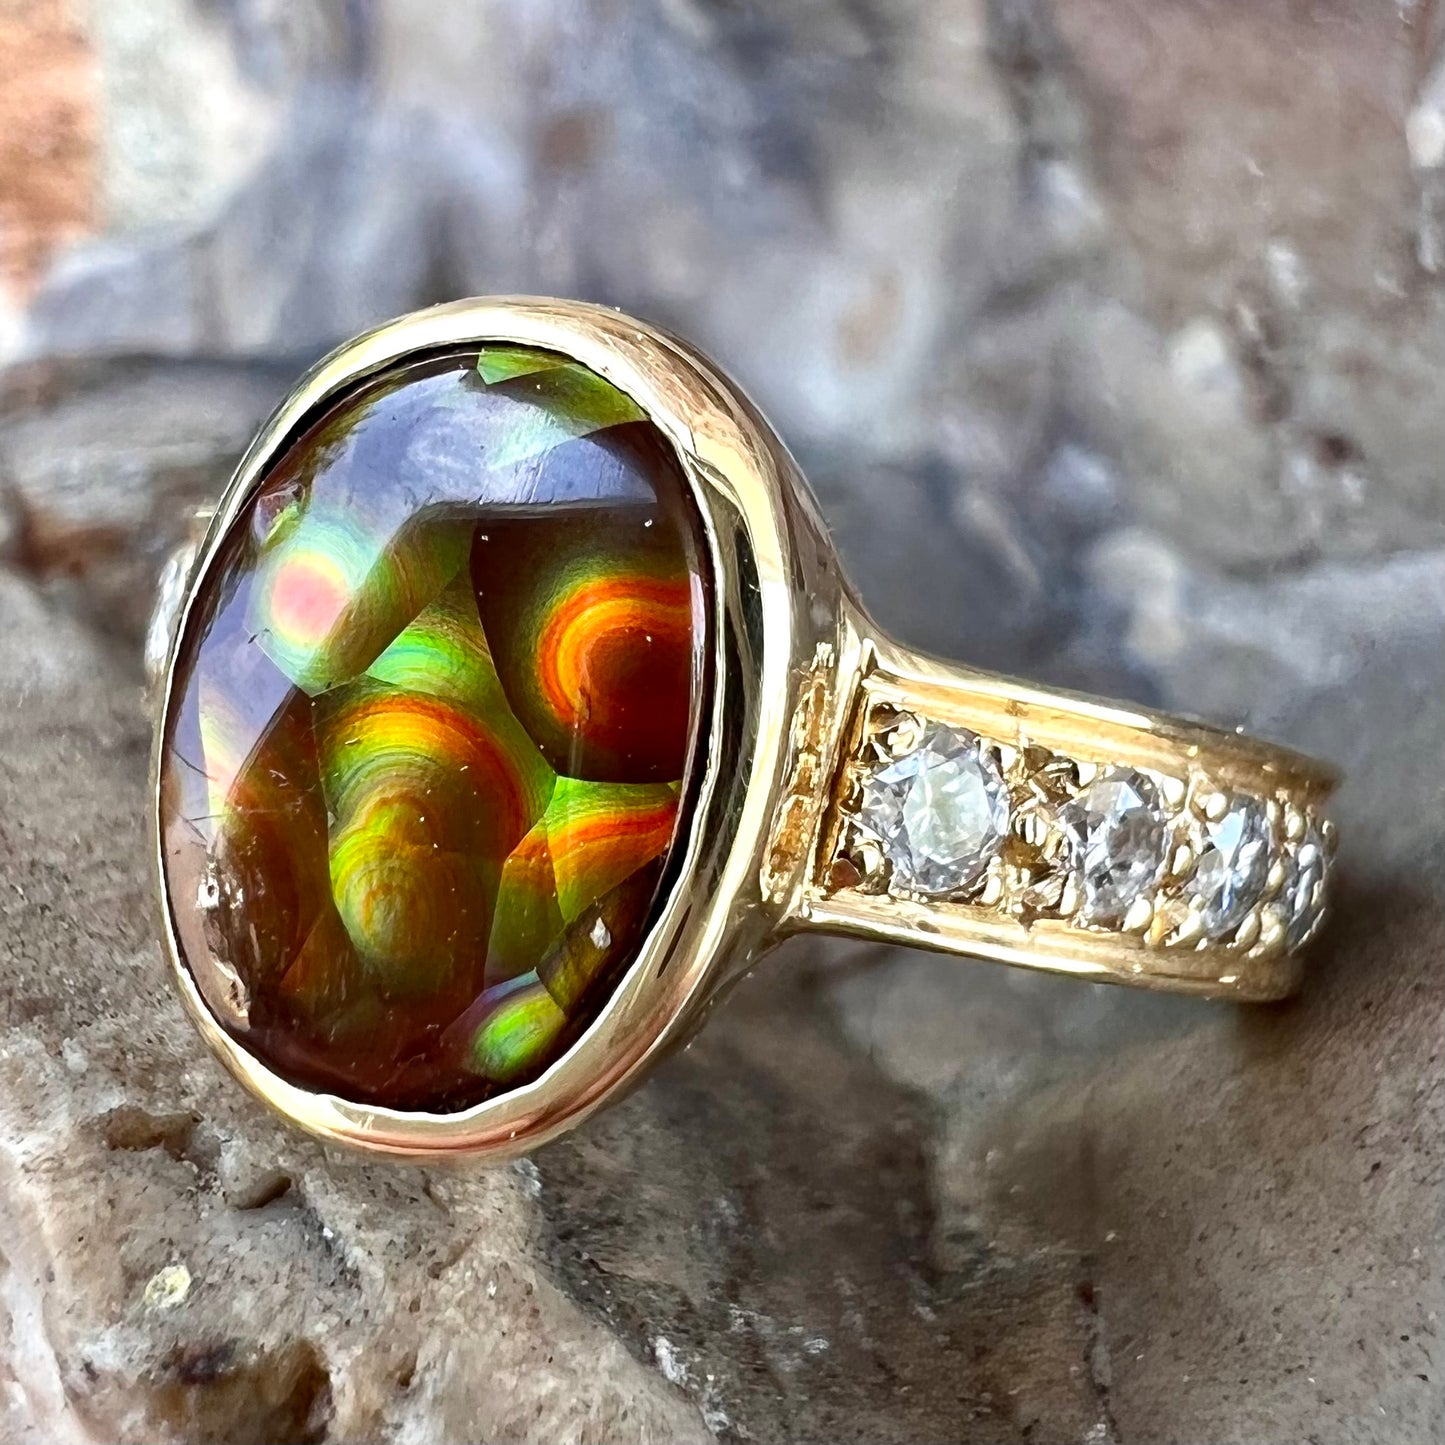 A ladies' gold fire agate and diamond engagement ring.